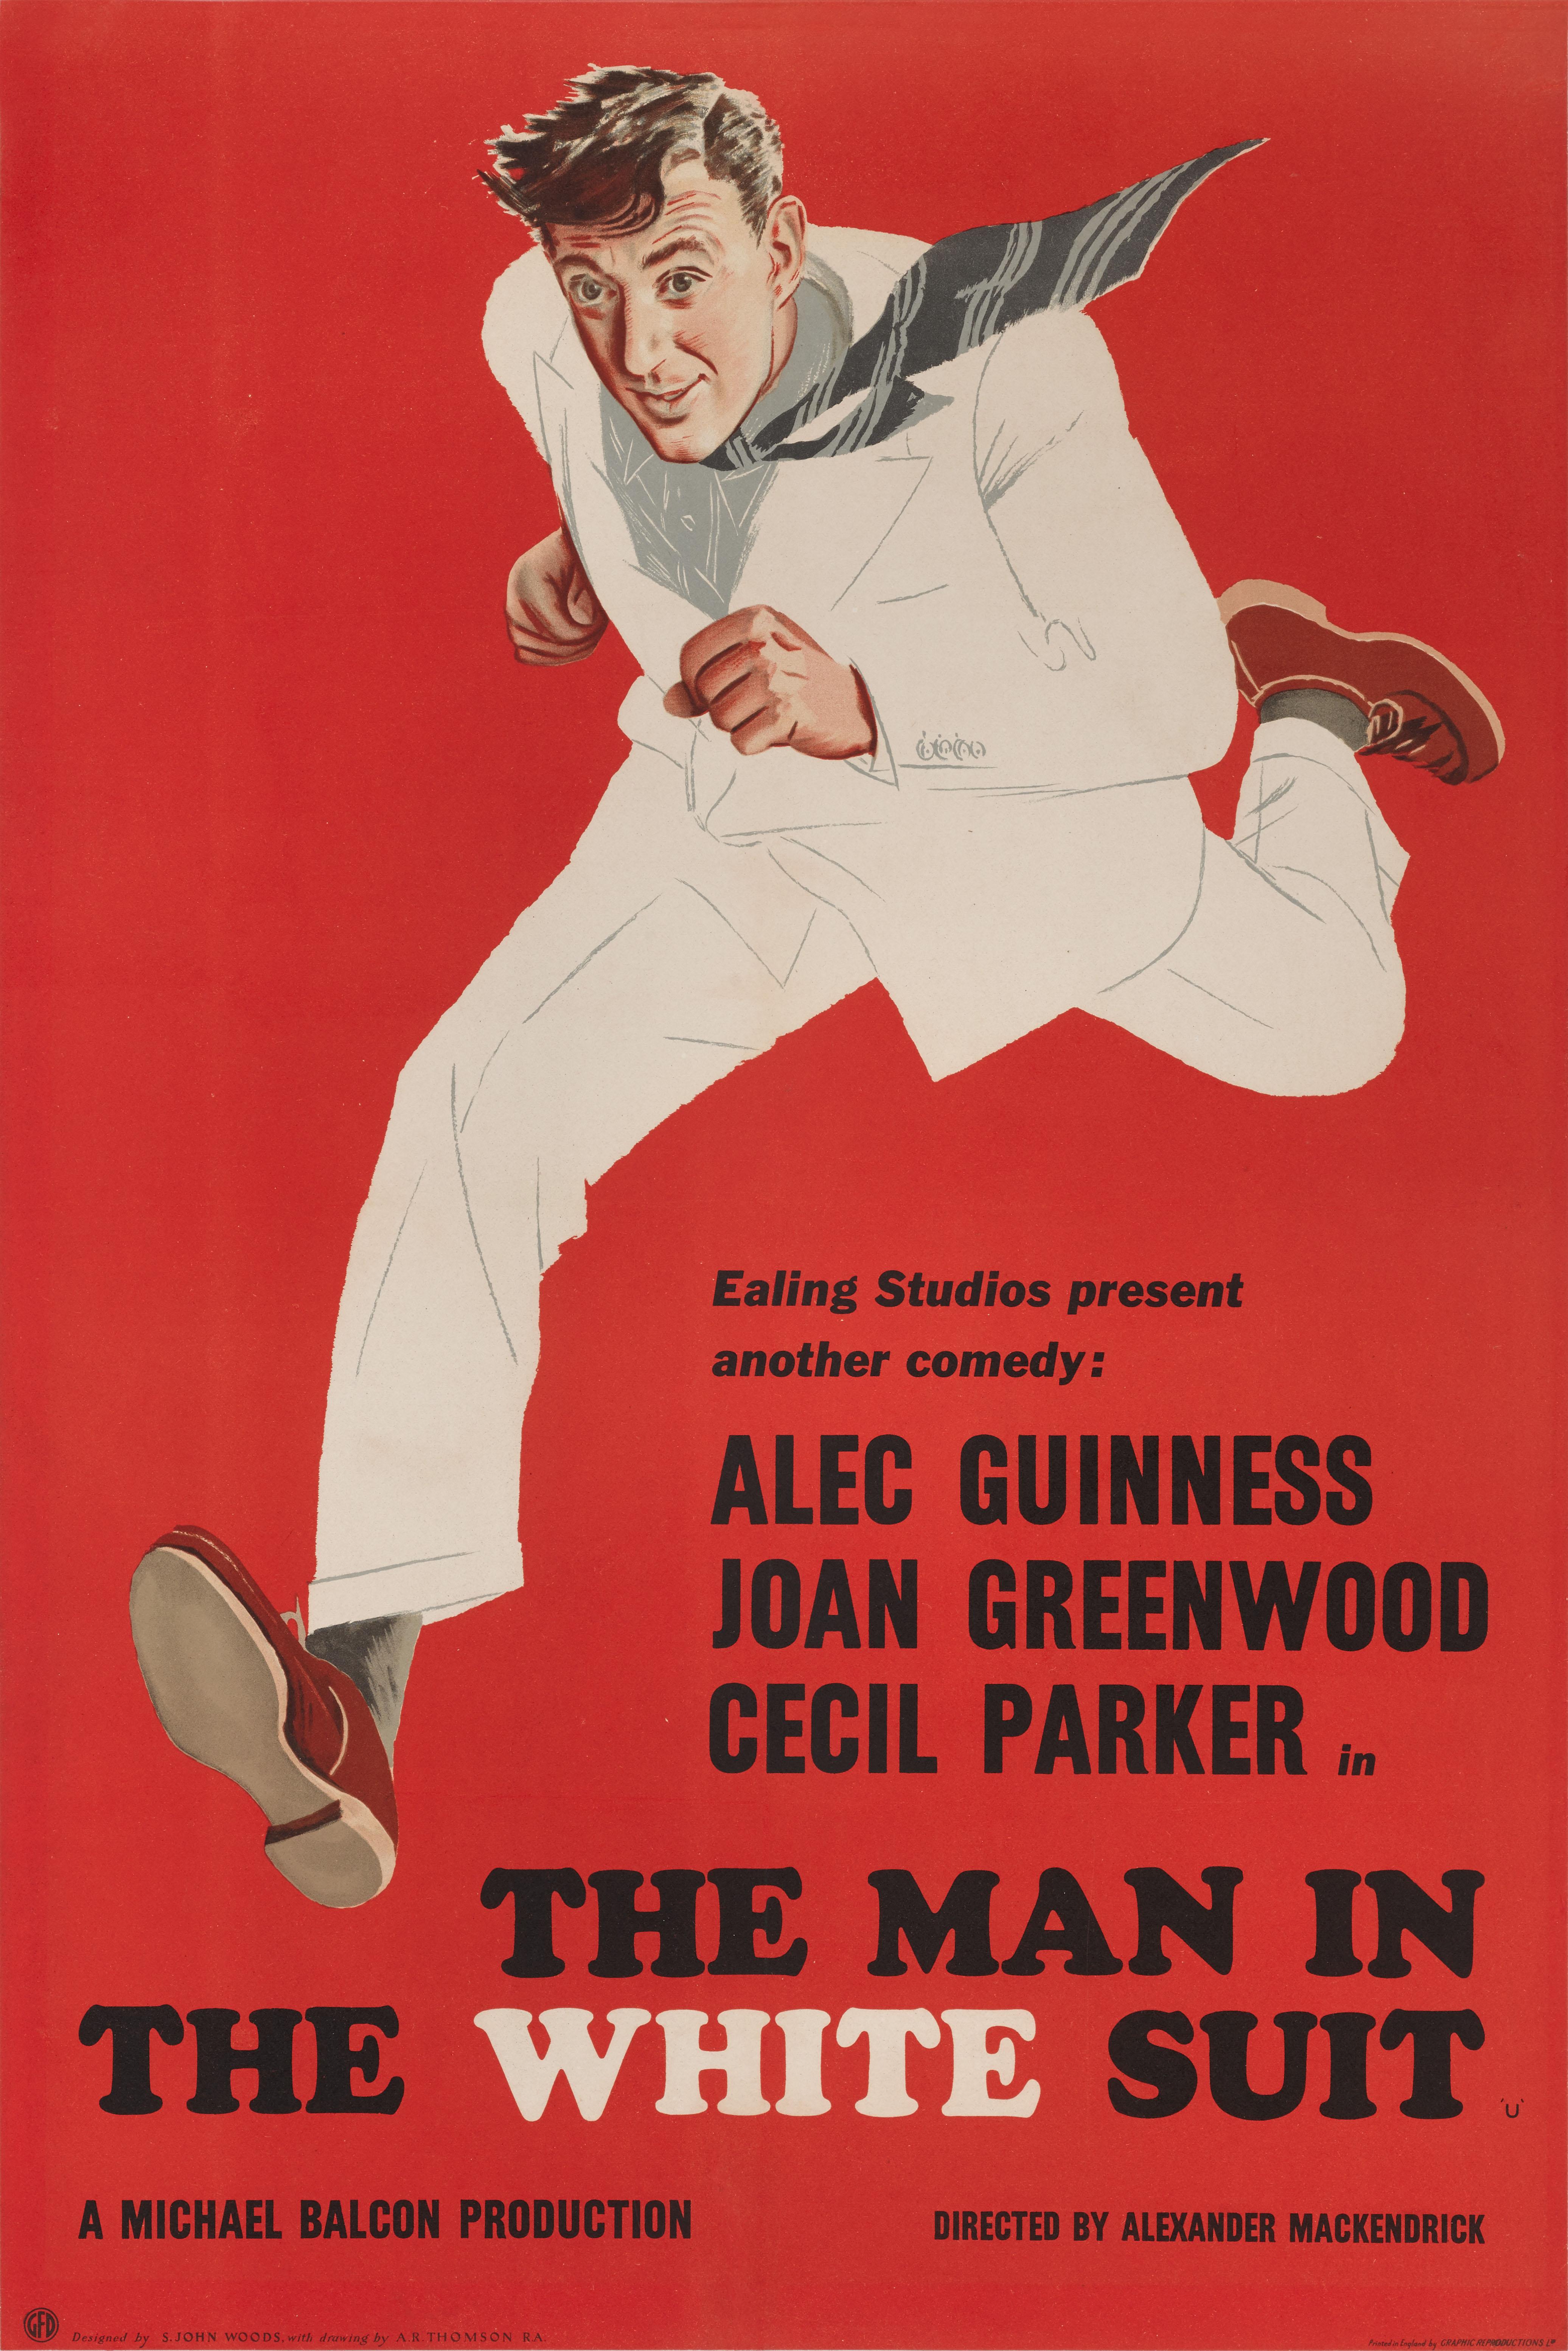 Original British film poster for the classic 1951 Ealing comedy.

Most film posters were designed in house by studio artists and designers. However, throughout the 40s and 50s Ealing Studios broke the mould by adopting an ambitious and inventive